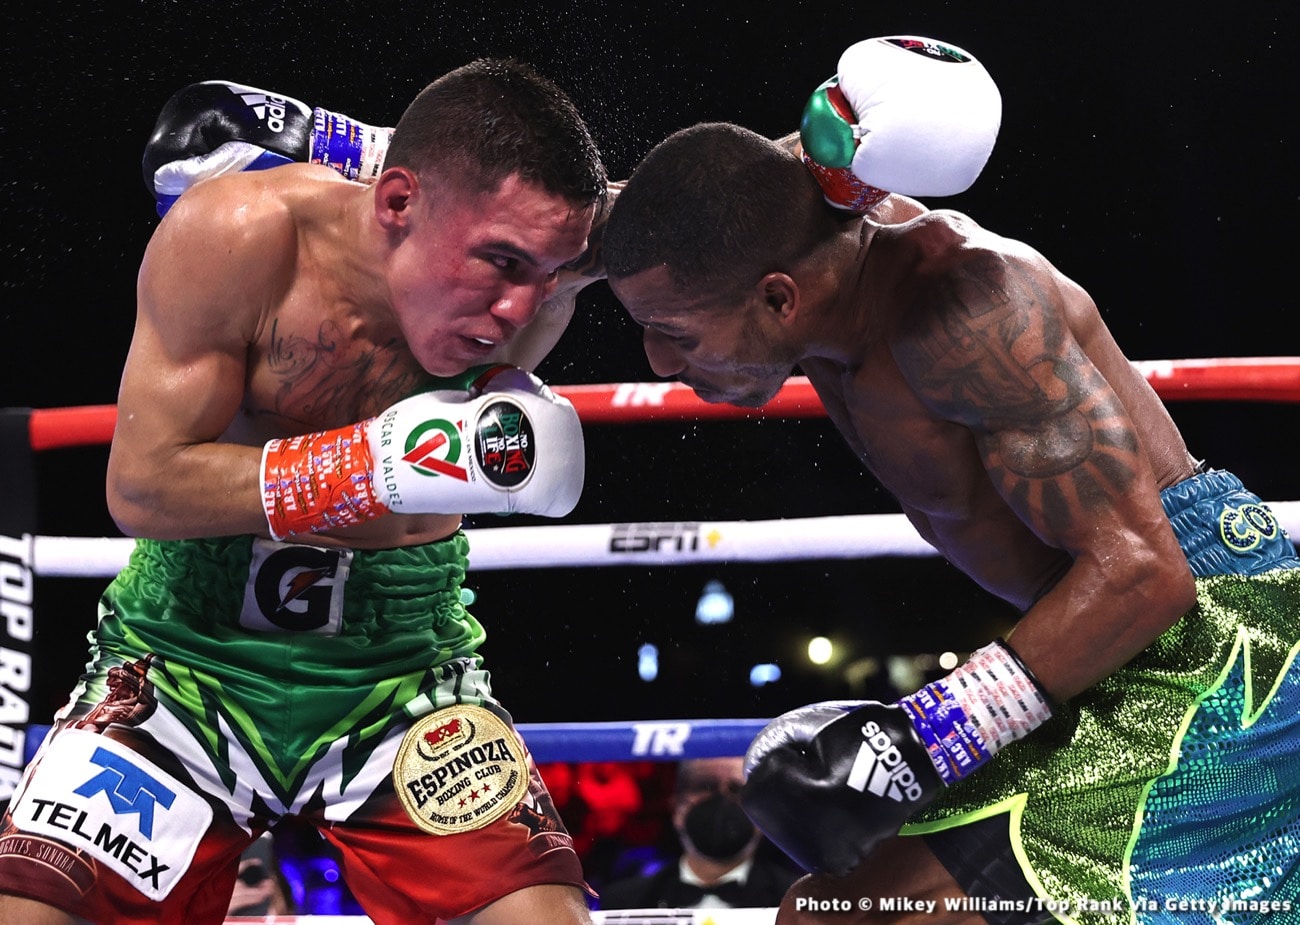 Valdez vs. Conceicao - live action results from Tucson